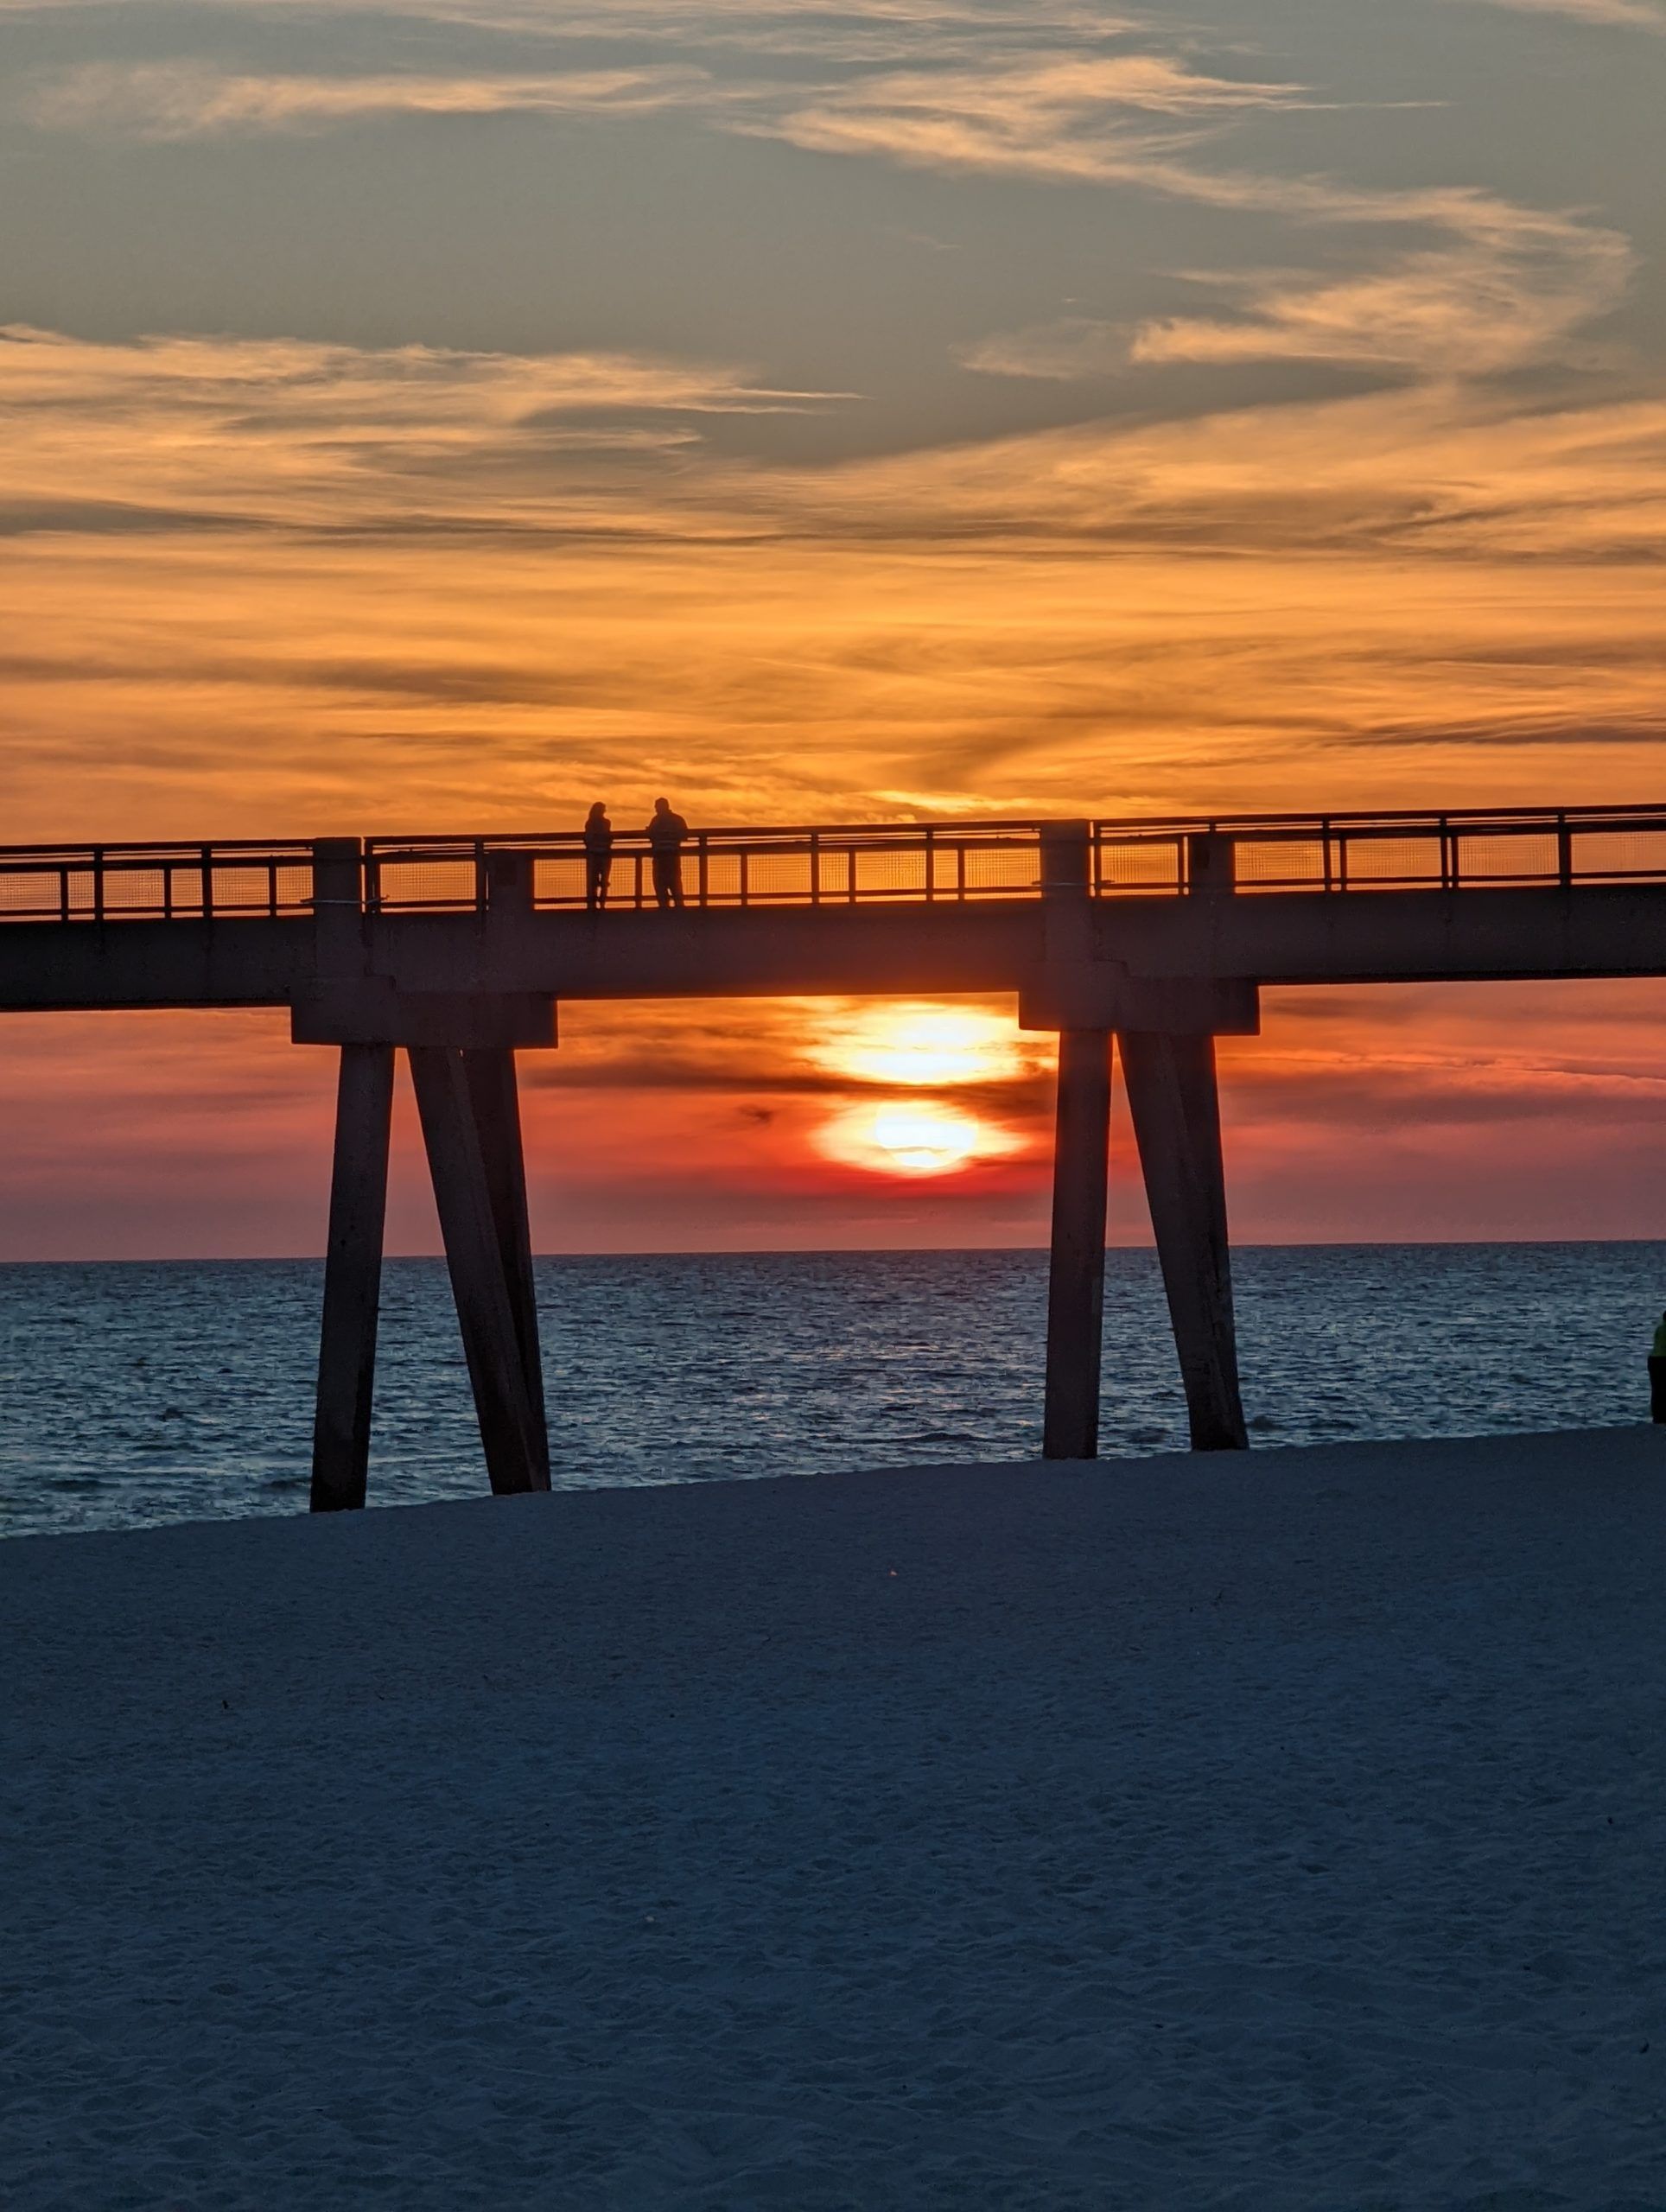 Today's Photo of the Day comes from Anna Schoenfeld. Anna recently captured this awesome sunset at Navarre Beach. 🌅